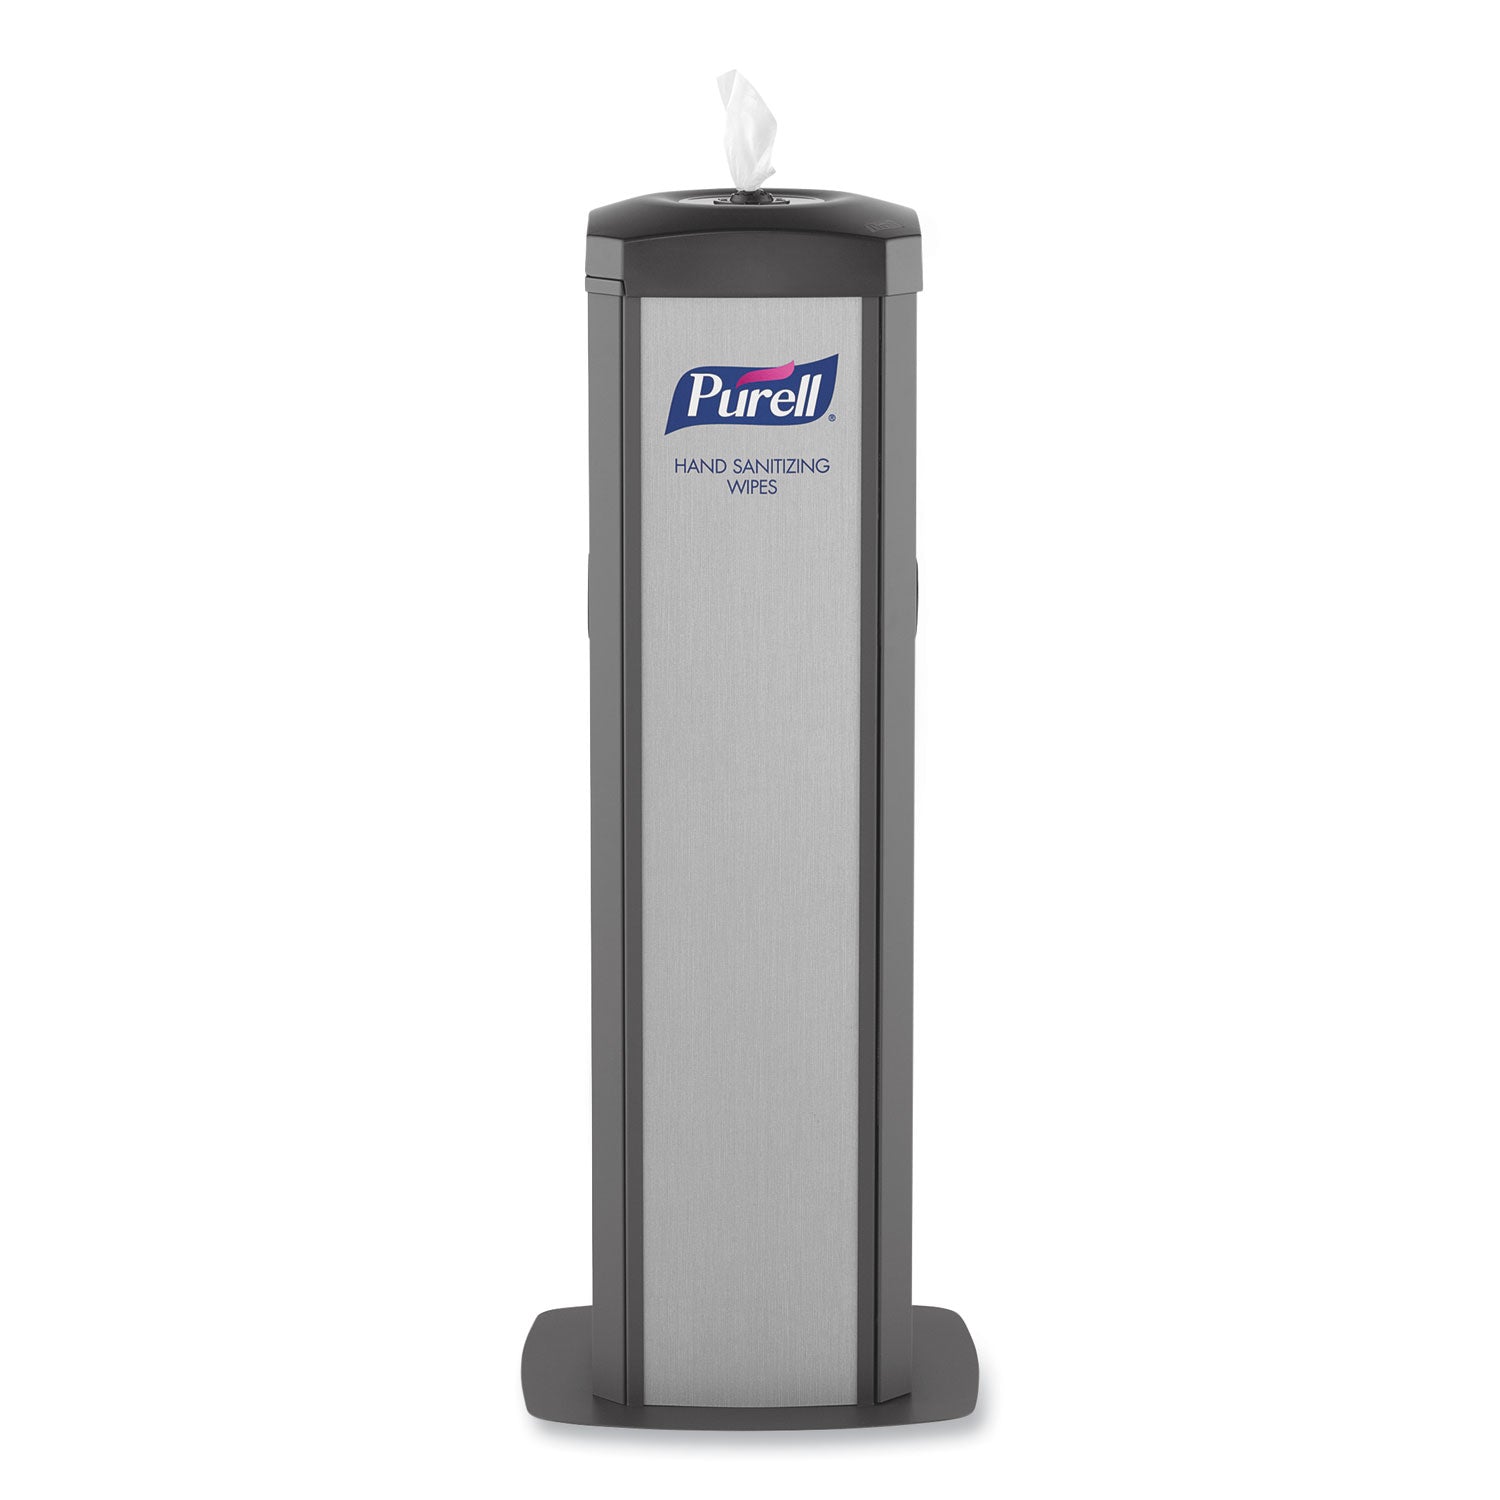 PURELL DS360 Hand Sanitizing Wipes Station - Steel - Black - Durable - 1 / Carton - 1